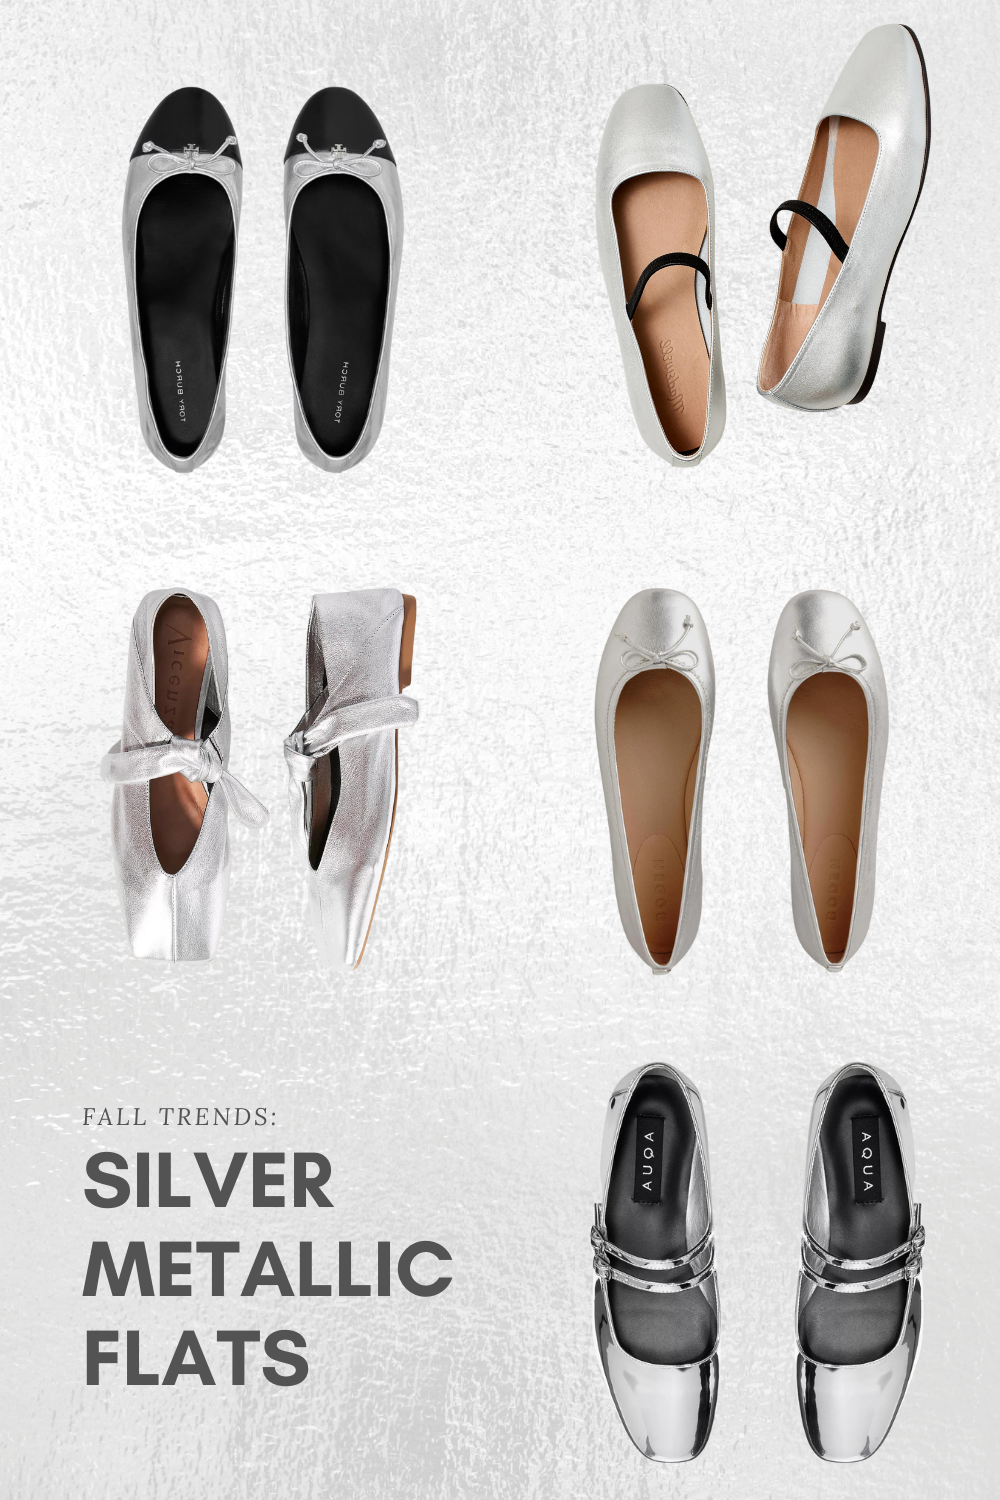 Silver Metallic Flats are a Big Trend This Fall - Tea Cups & Tulips